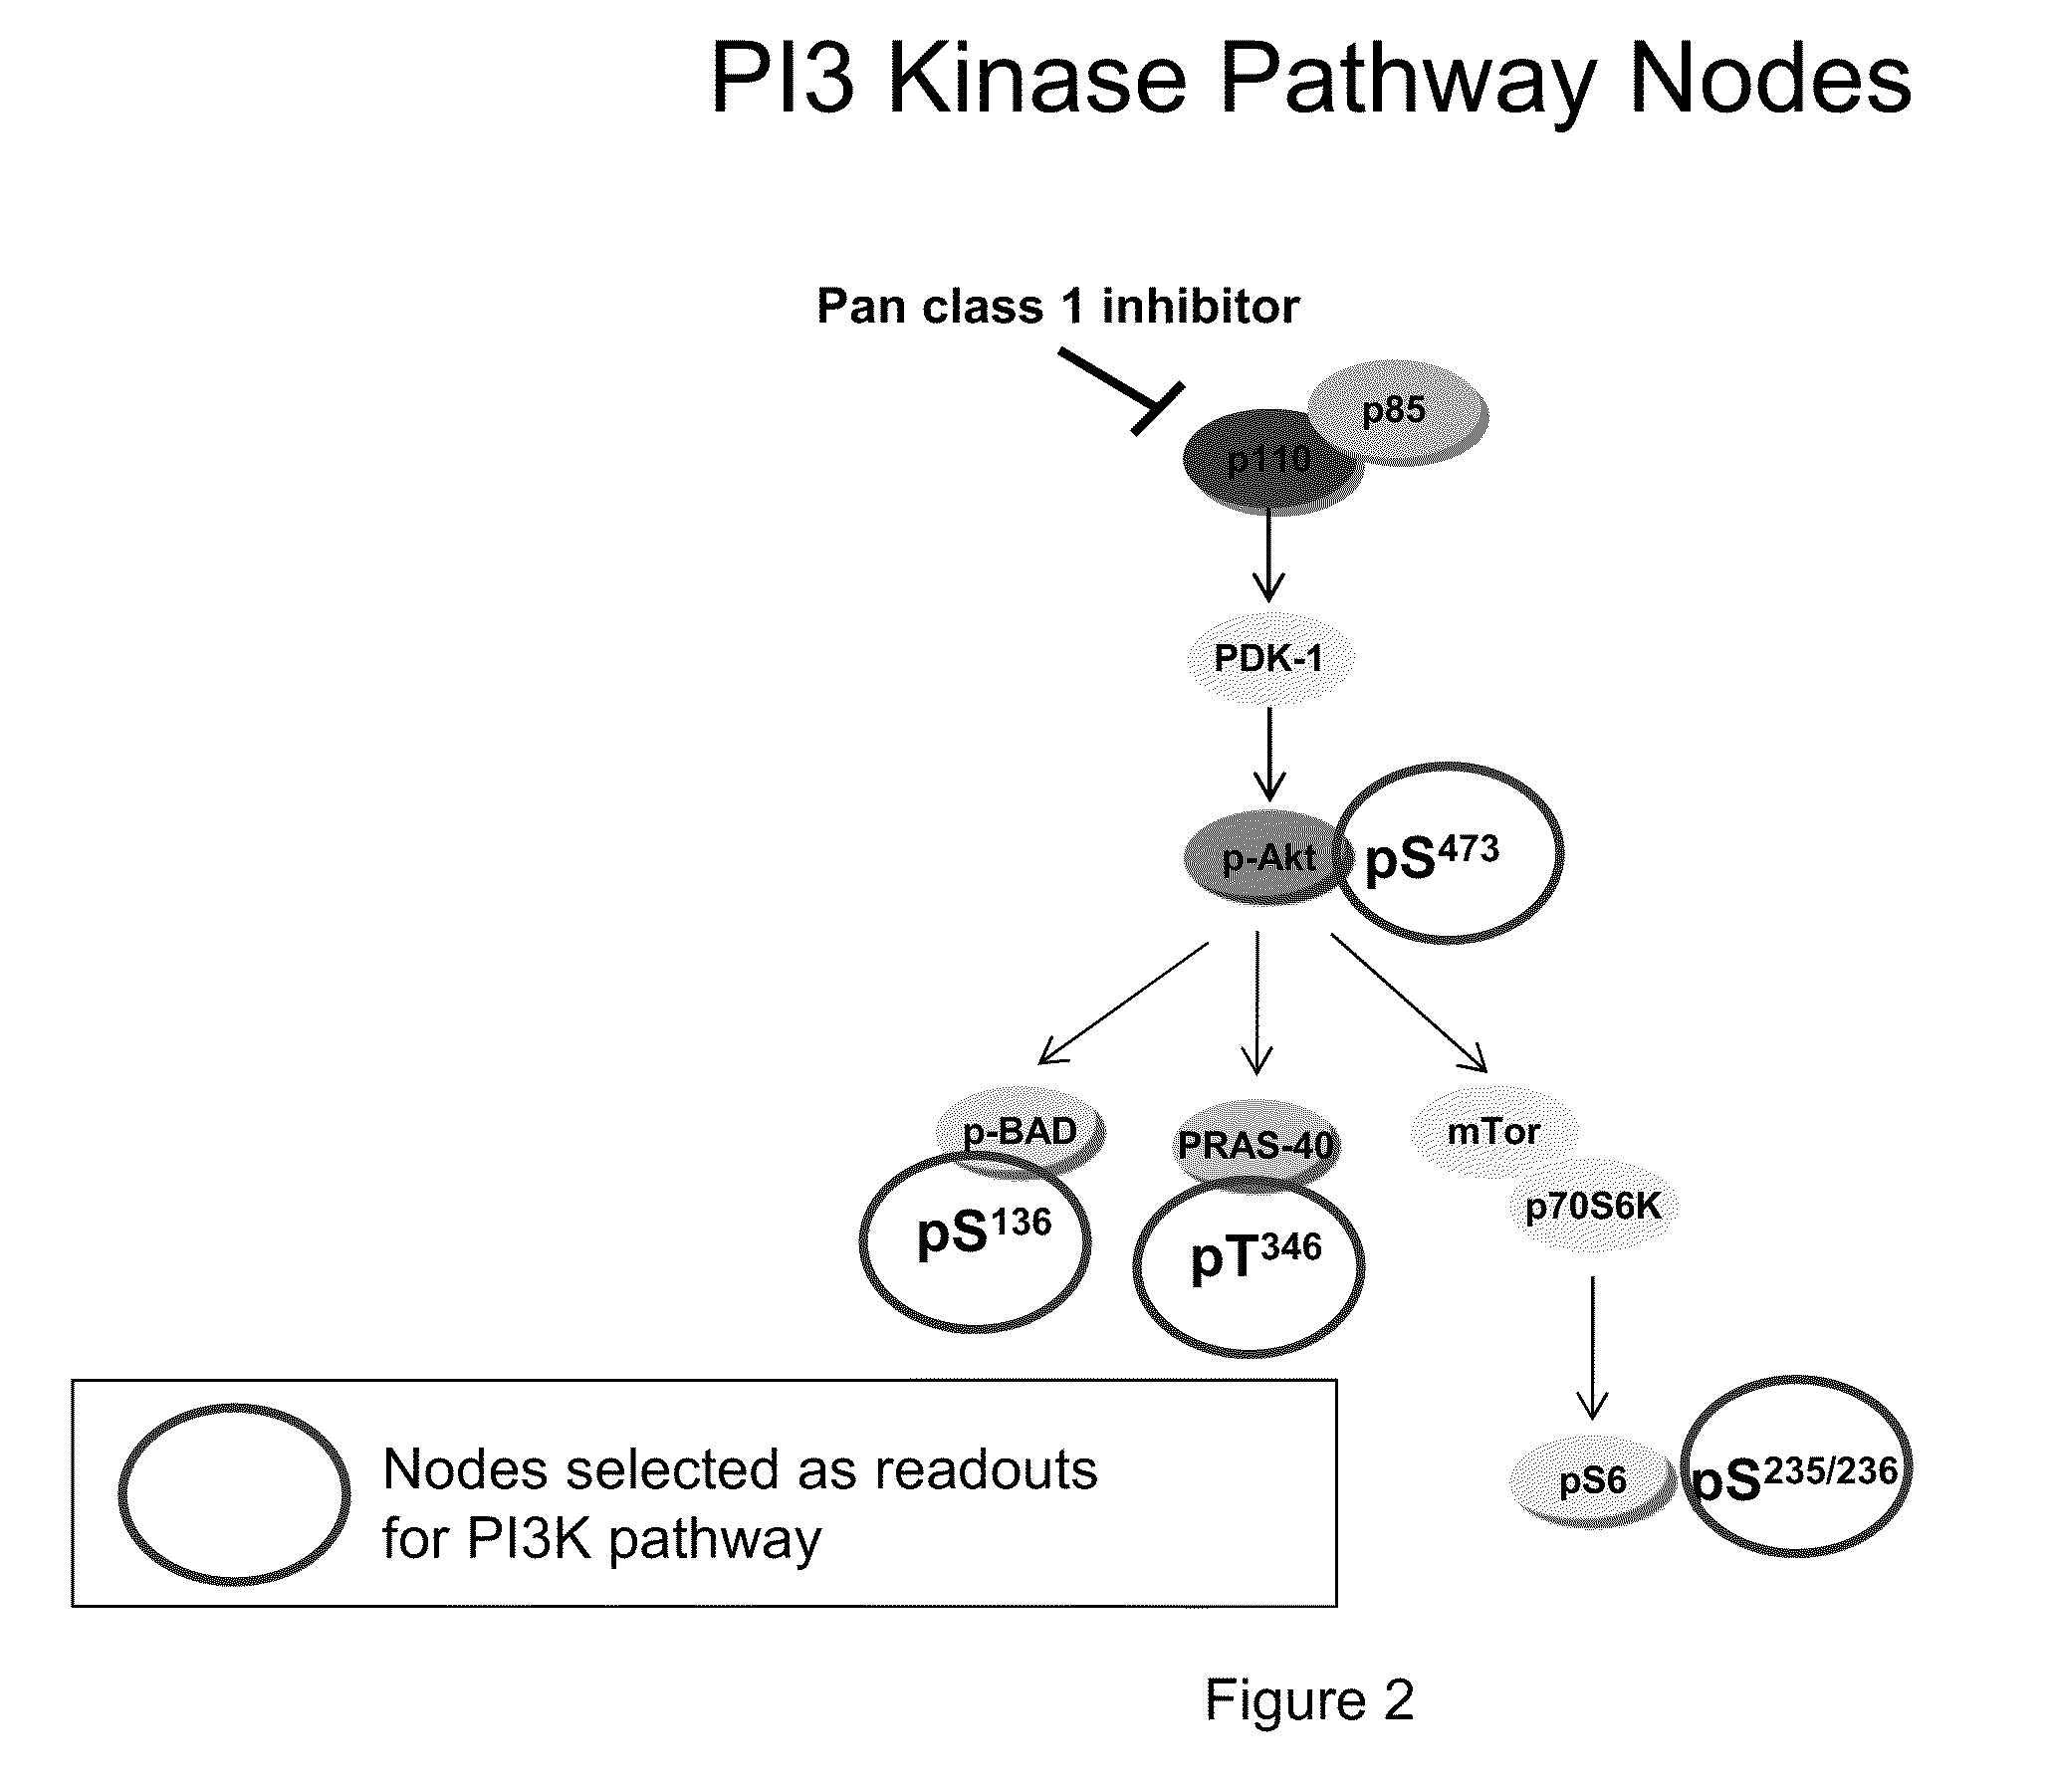 Multiple mechanisms for modulation of the pi3 kinase pathway